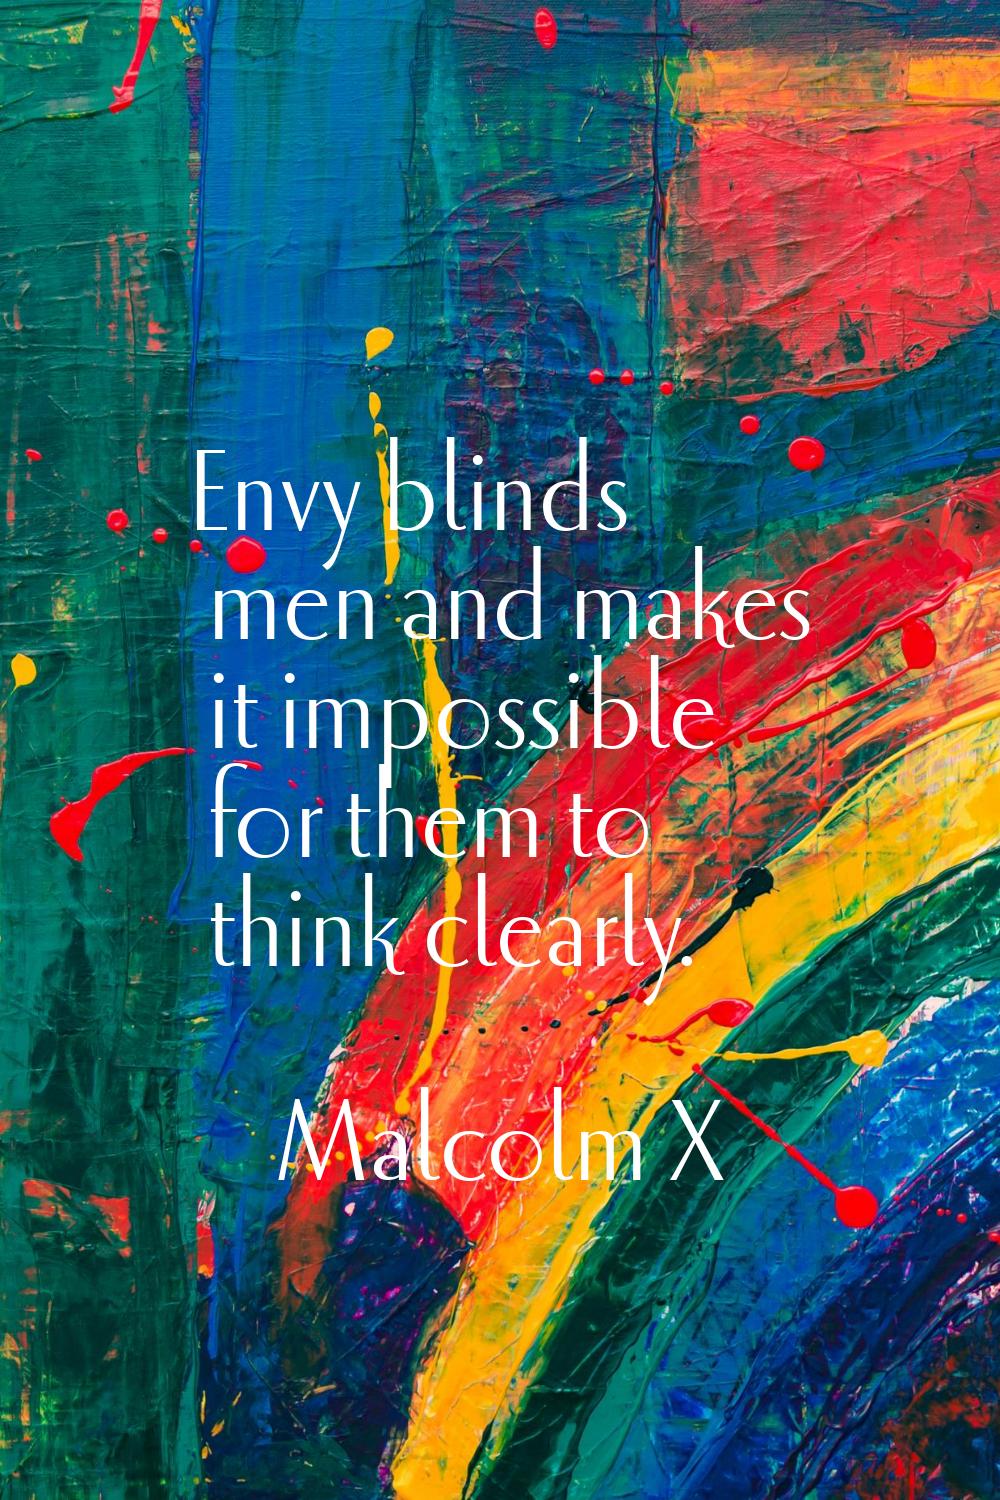 Envy blinds men and makes it impossible for them to think clearly.